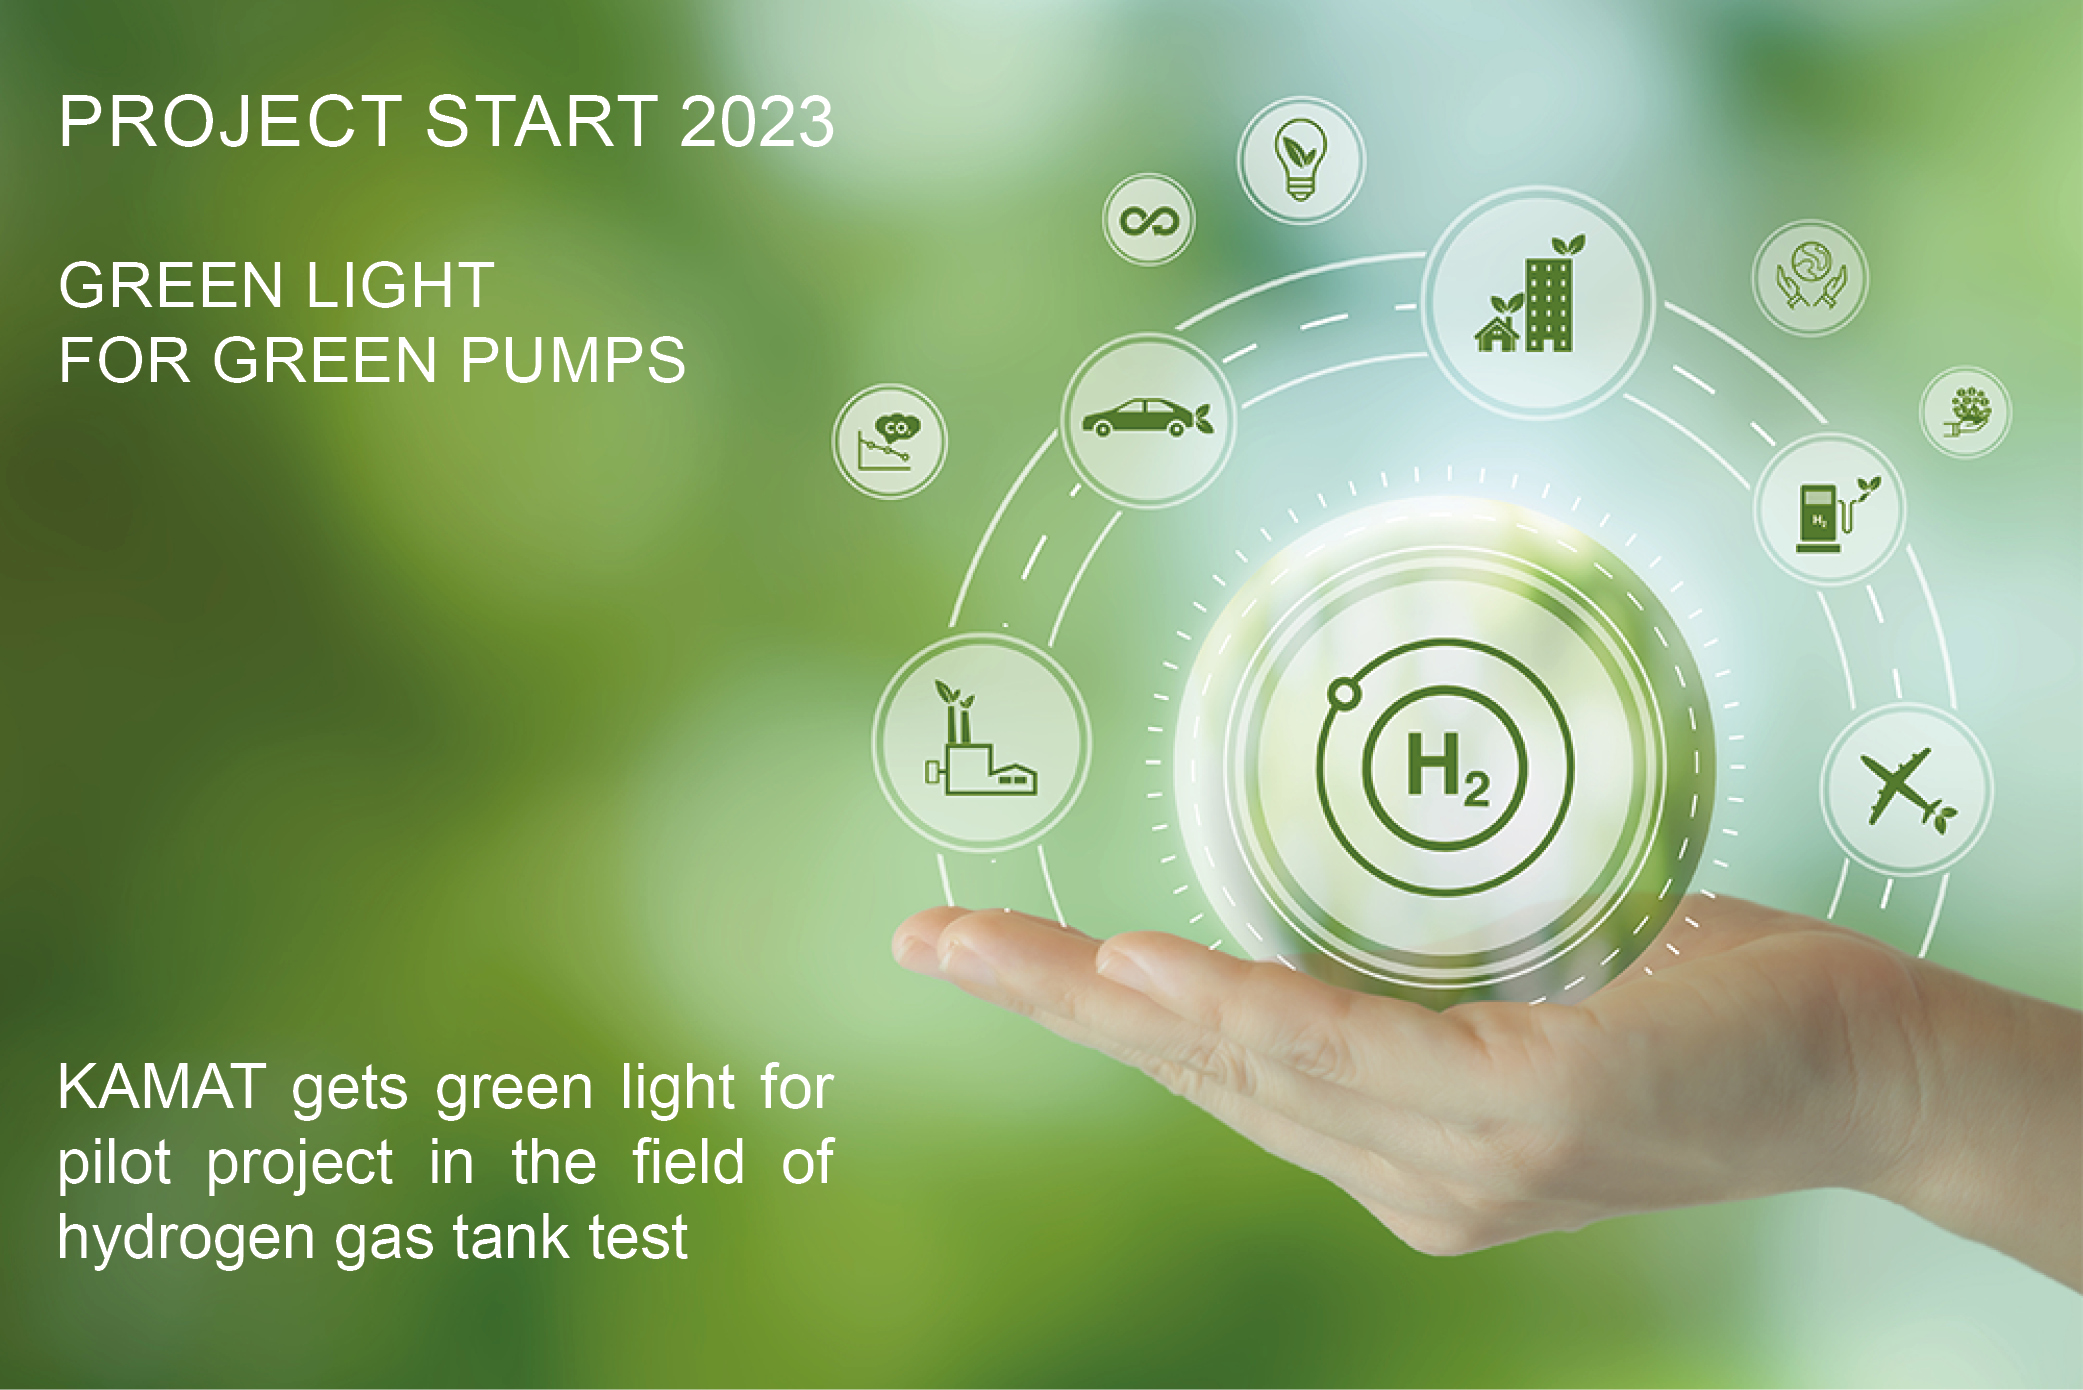 Feature image for news about project start in the H2 area: Mood image Hydrogen symbol image, you can see a hand with a green background circling various infographics on the subject of industry, transport and energy, as well as a text that KAMAT has received the green light for a major project in the field of hydrogen tank testing. (AdobeStock_547335326)